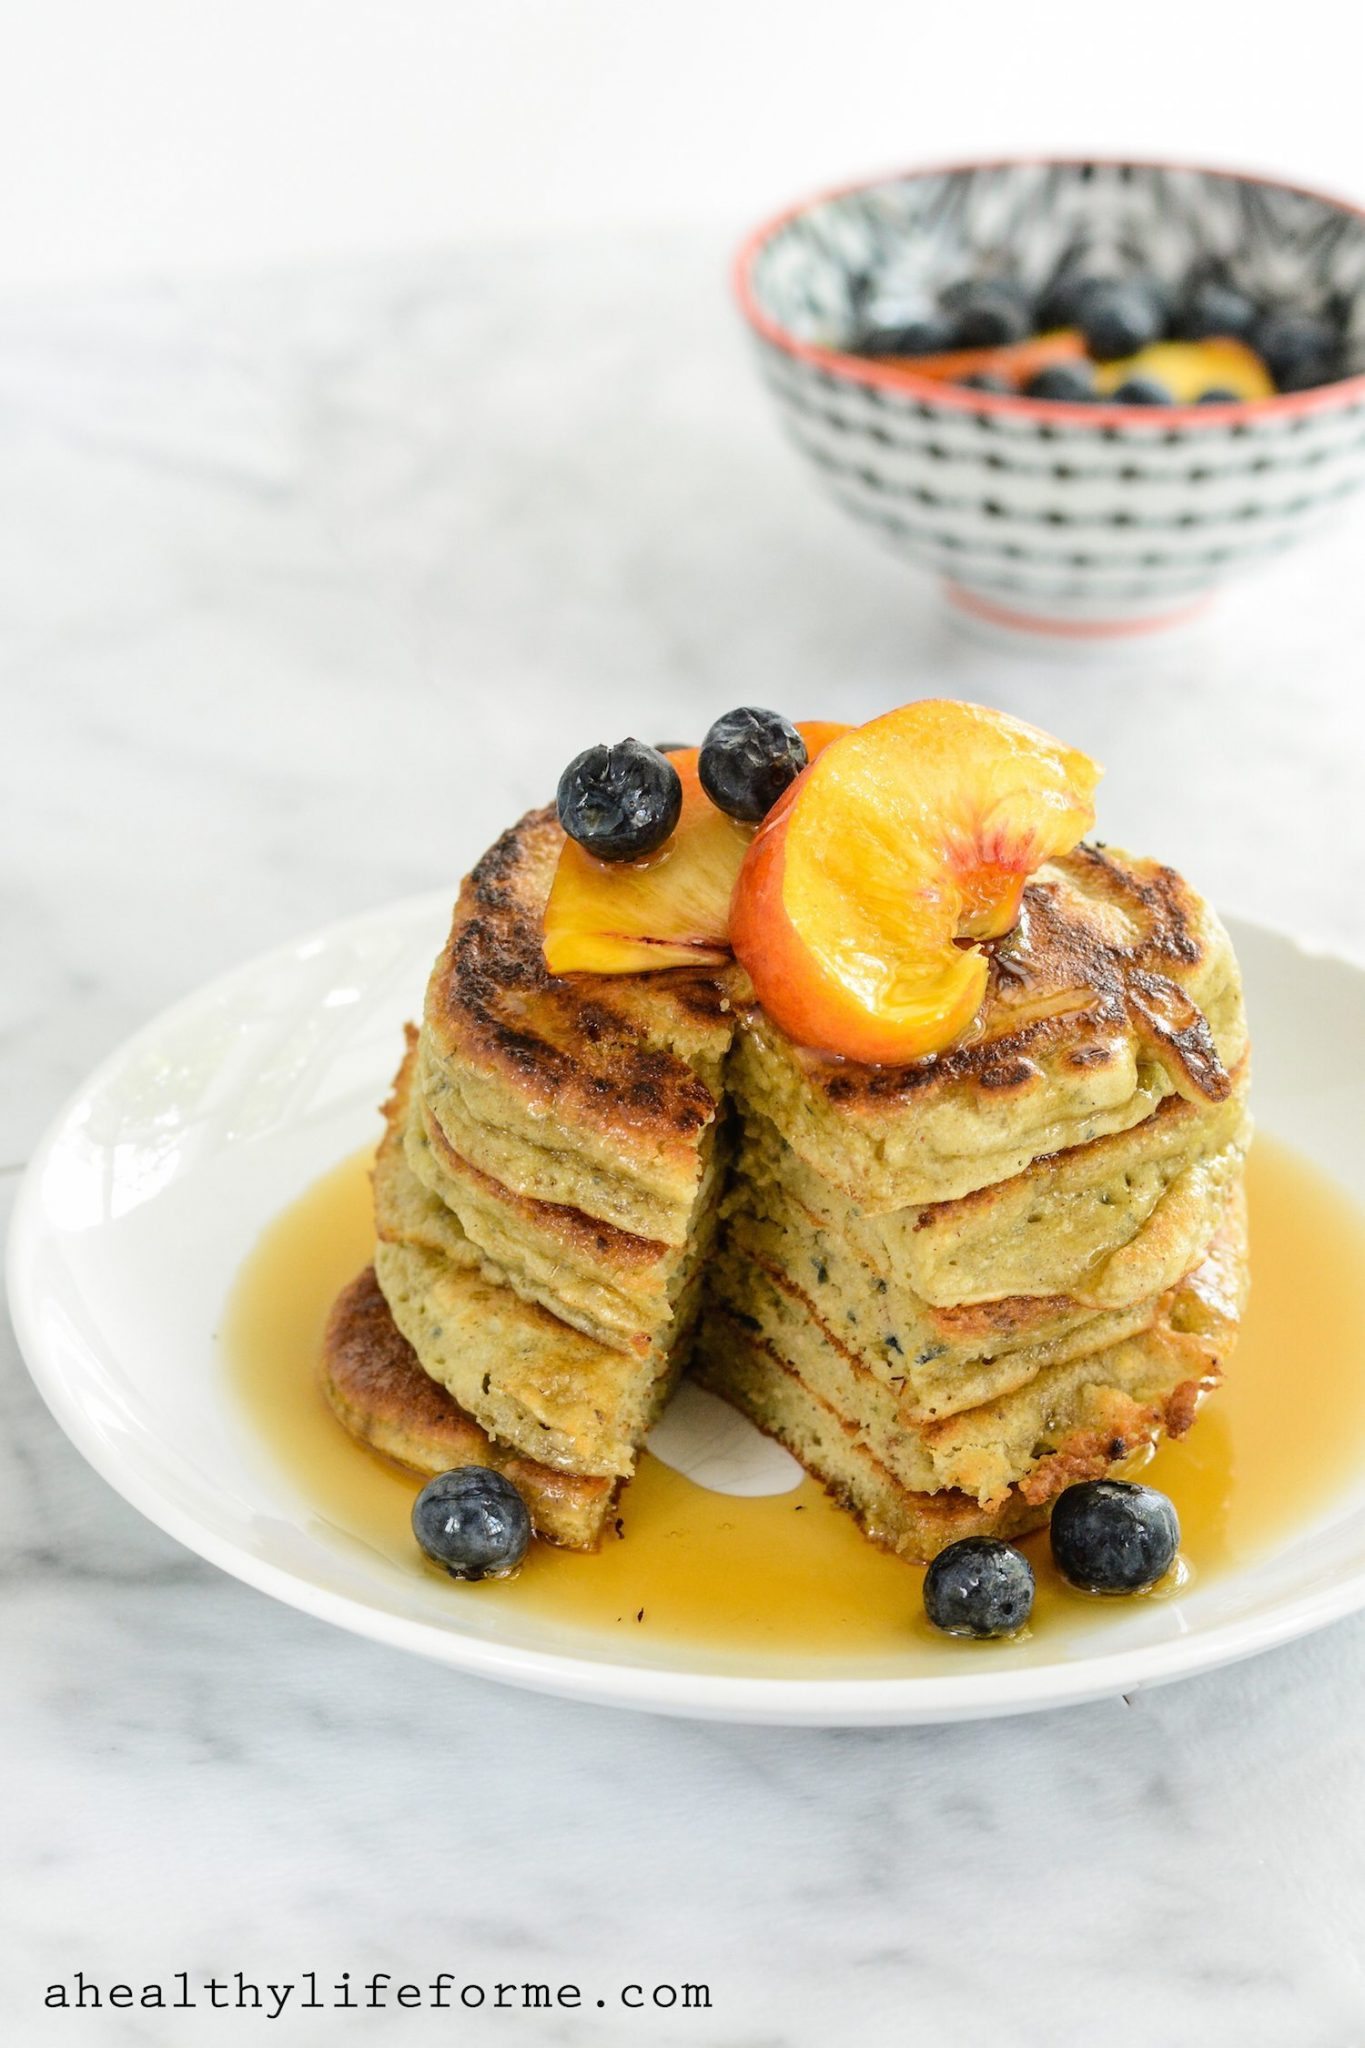 Plate of paleo pancakes with peaches, blueberries, and maple syrup